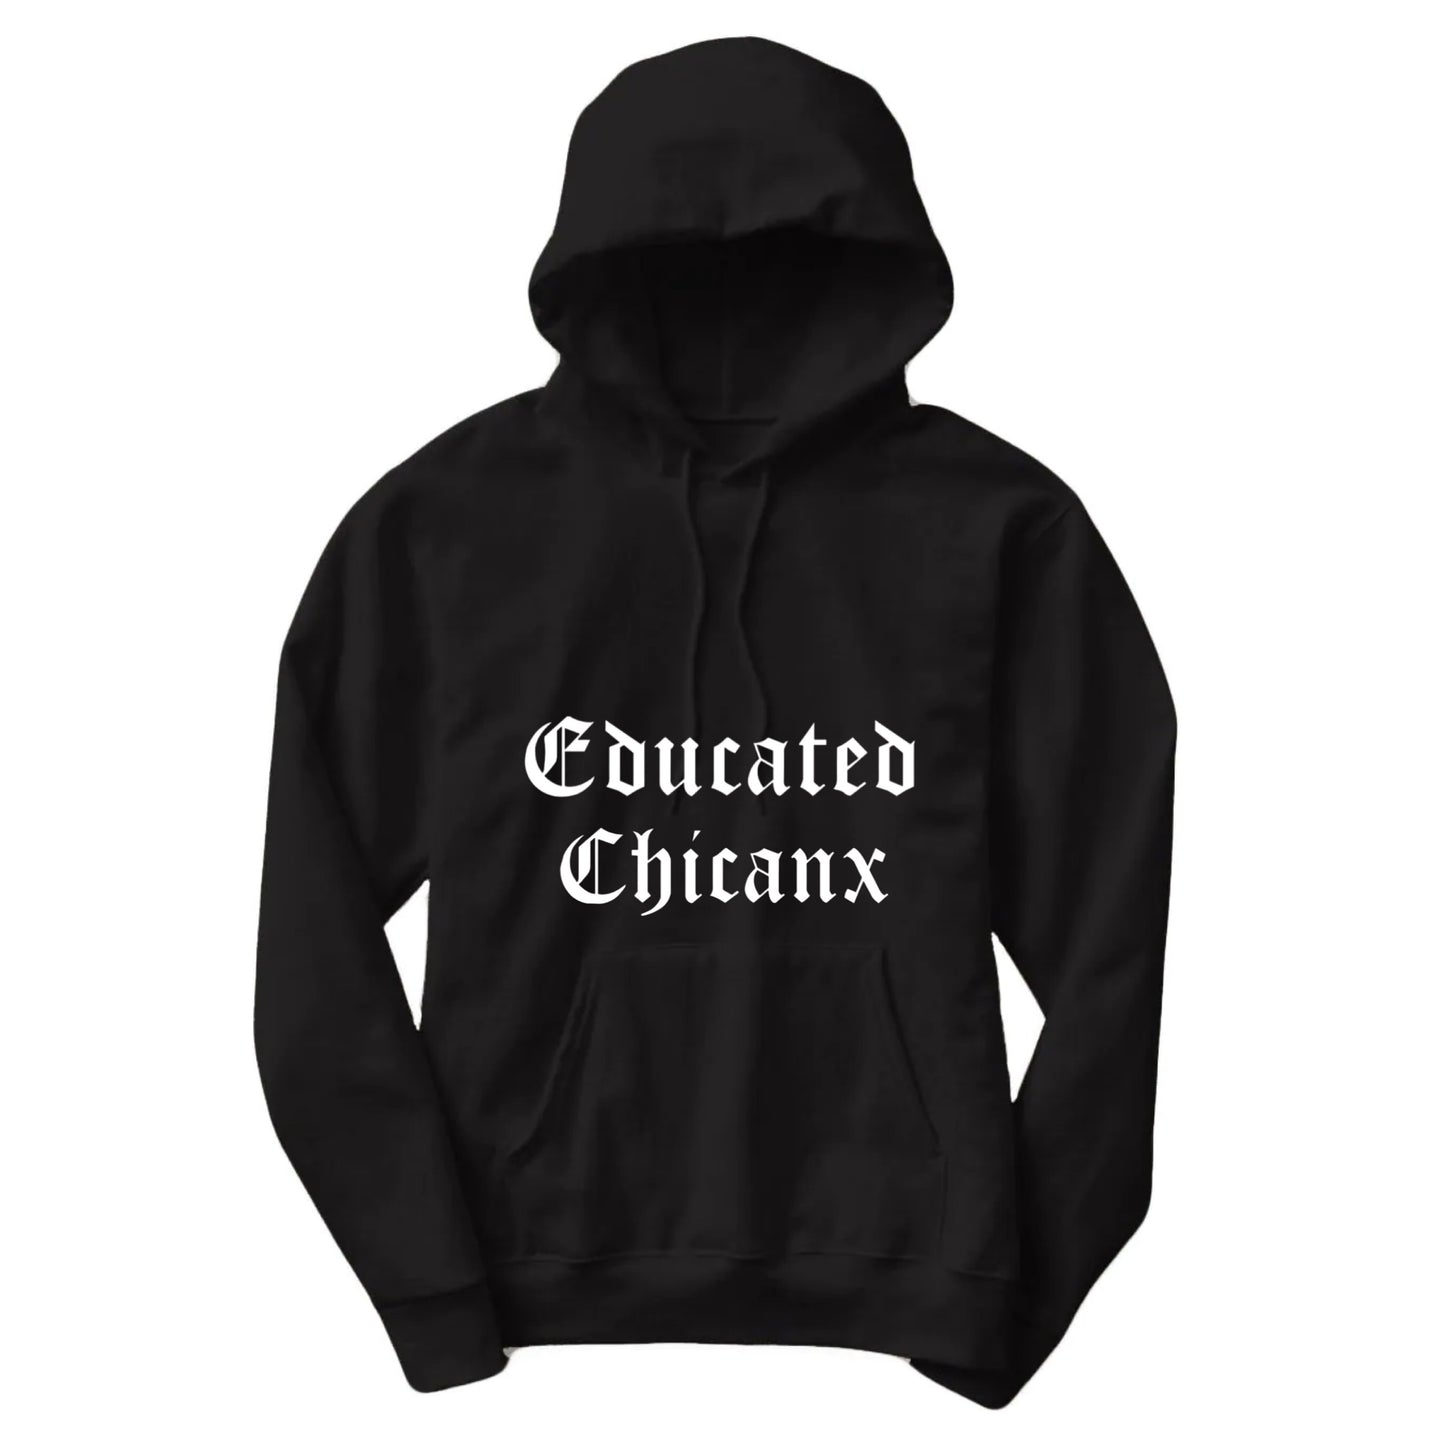 Hoodies | Educated Chicano/Chicana/Chicanx unisex size